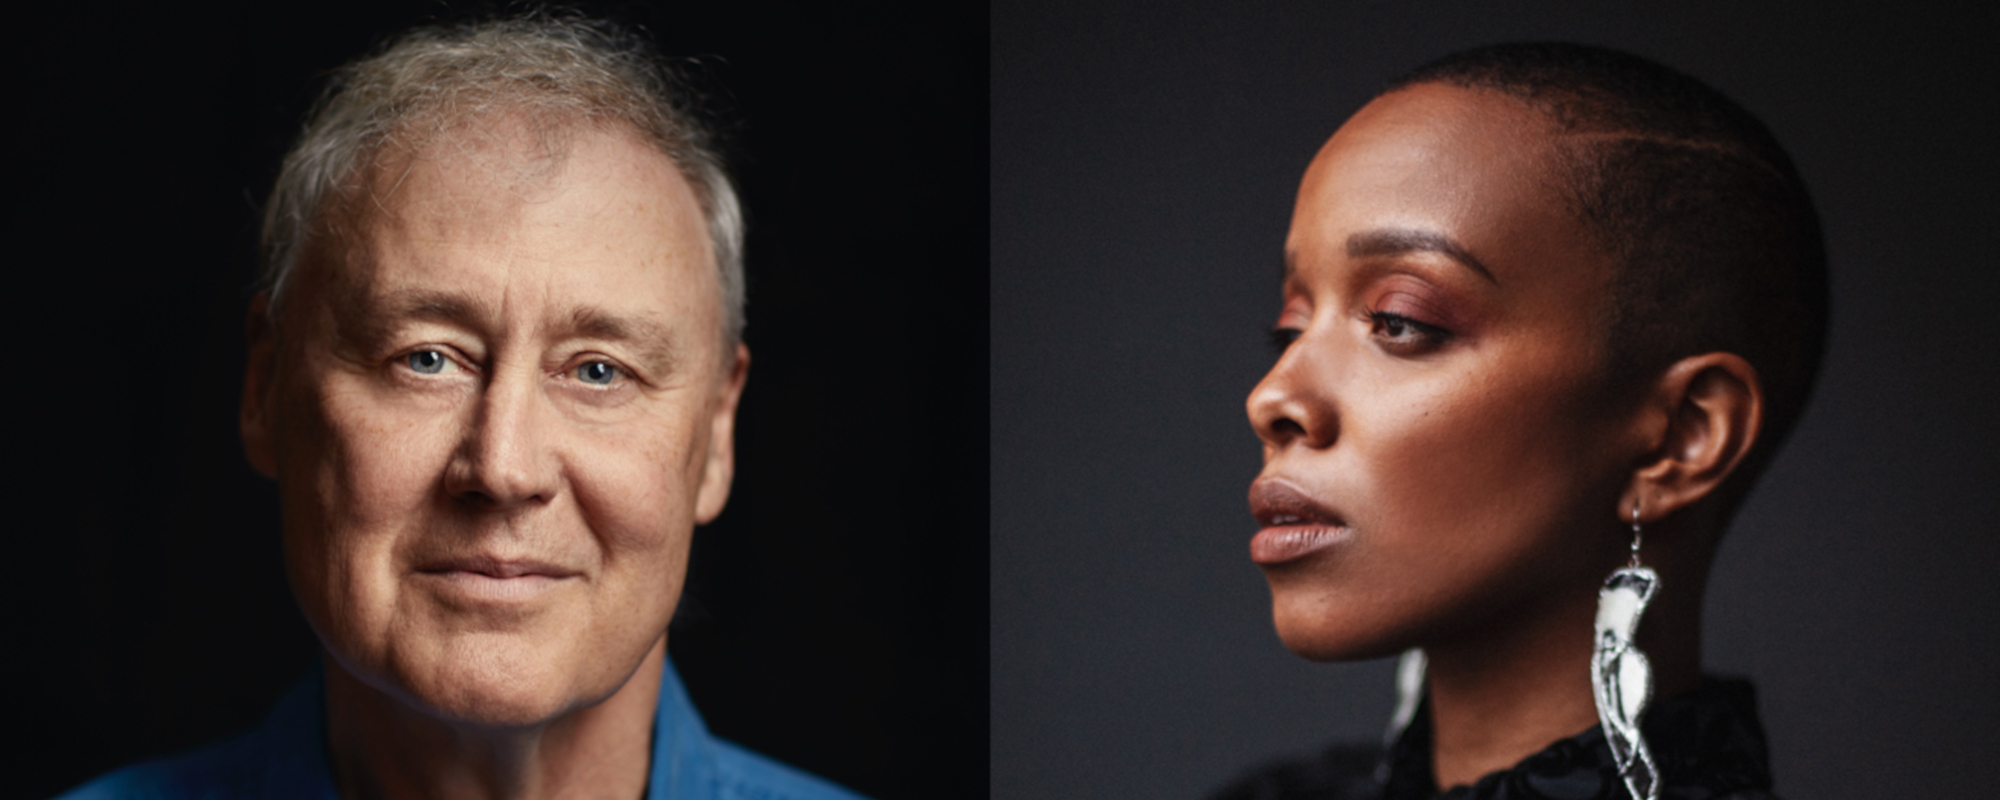 Jagjaguwar Announces ‘Join The Ritual’ Record Featuring Bruce Hornsby, Jamila Woods, and More